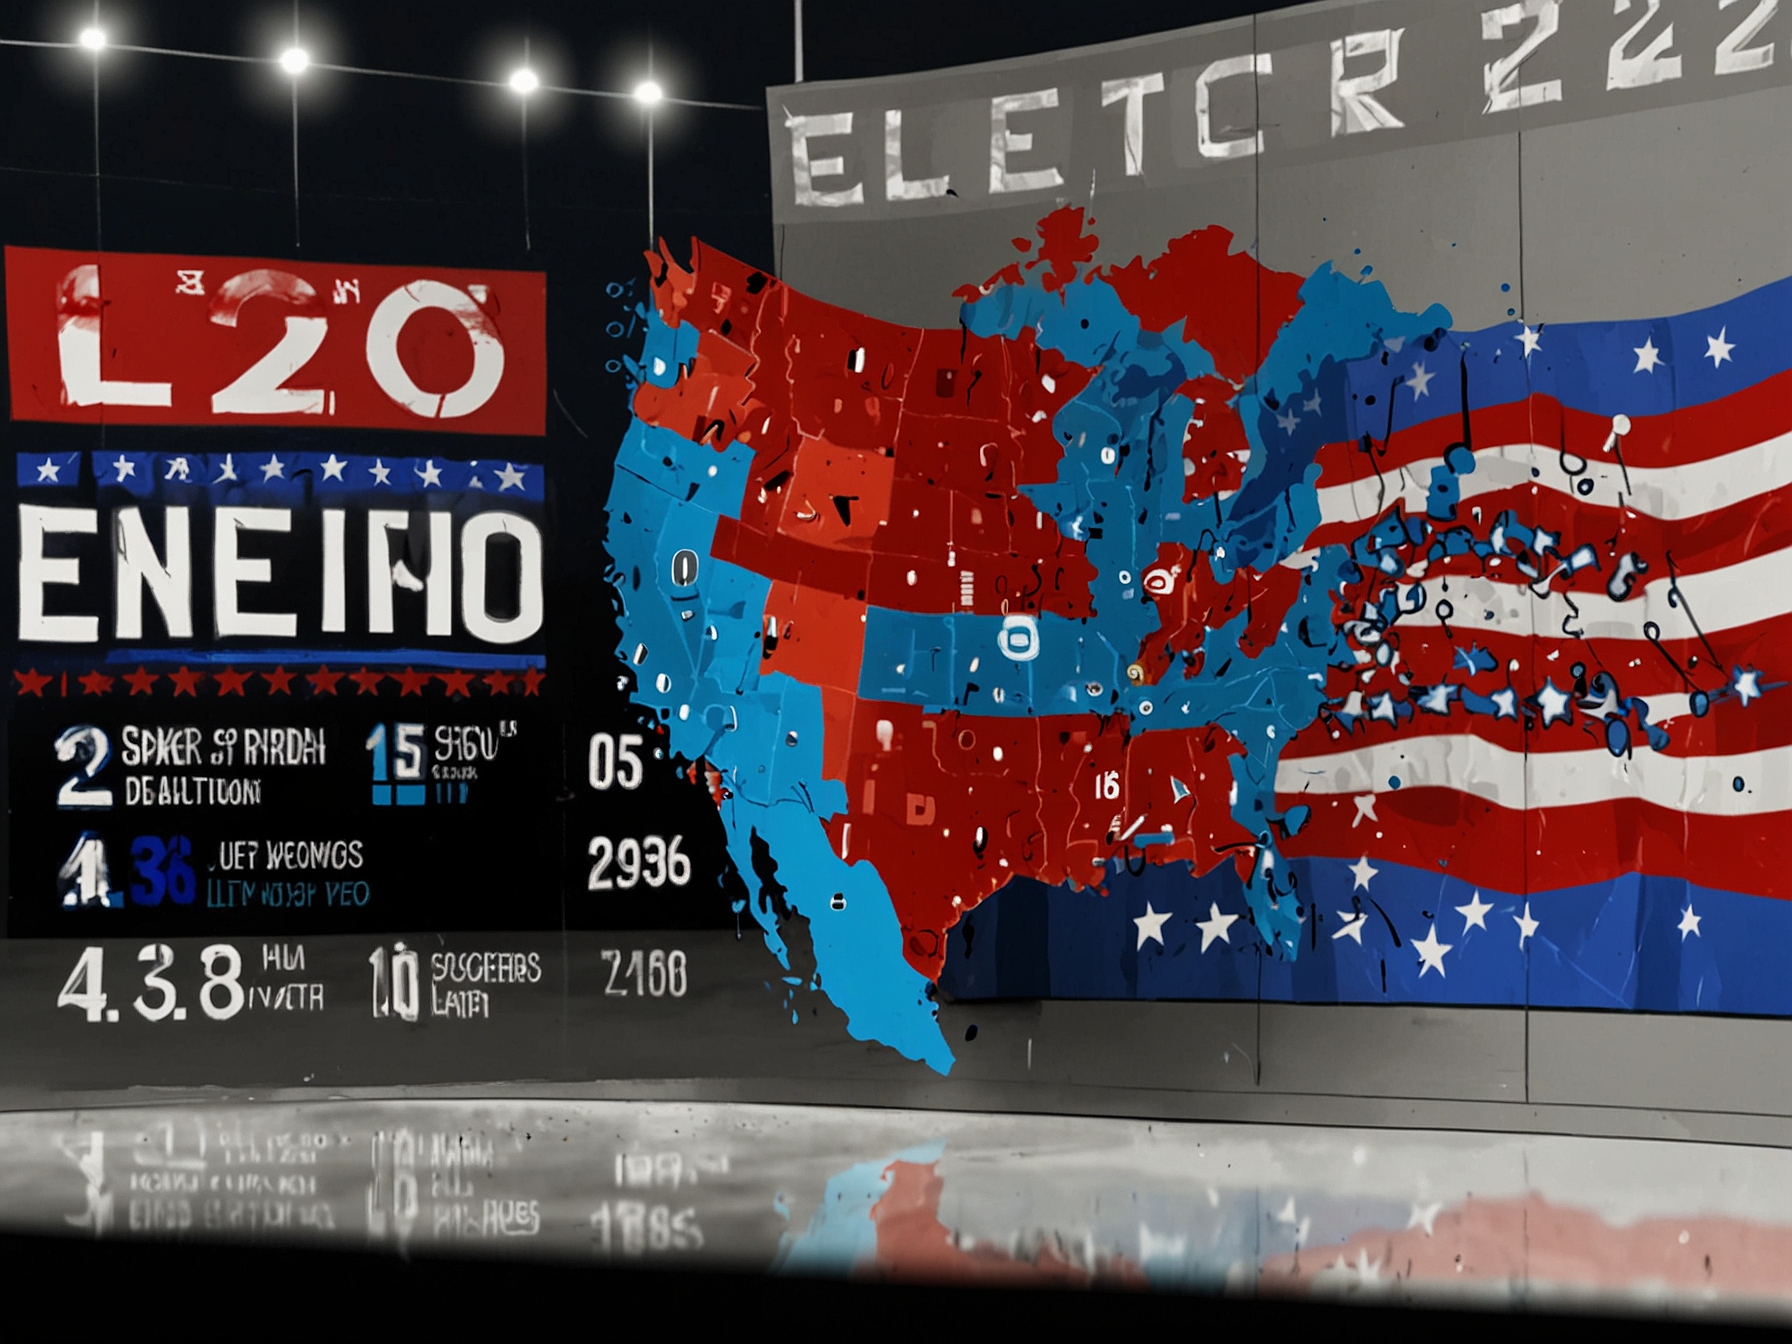 A close-up of the 2020 election results displayed on a digital screen.